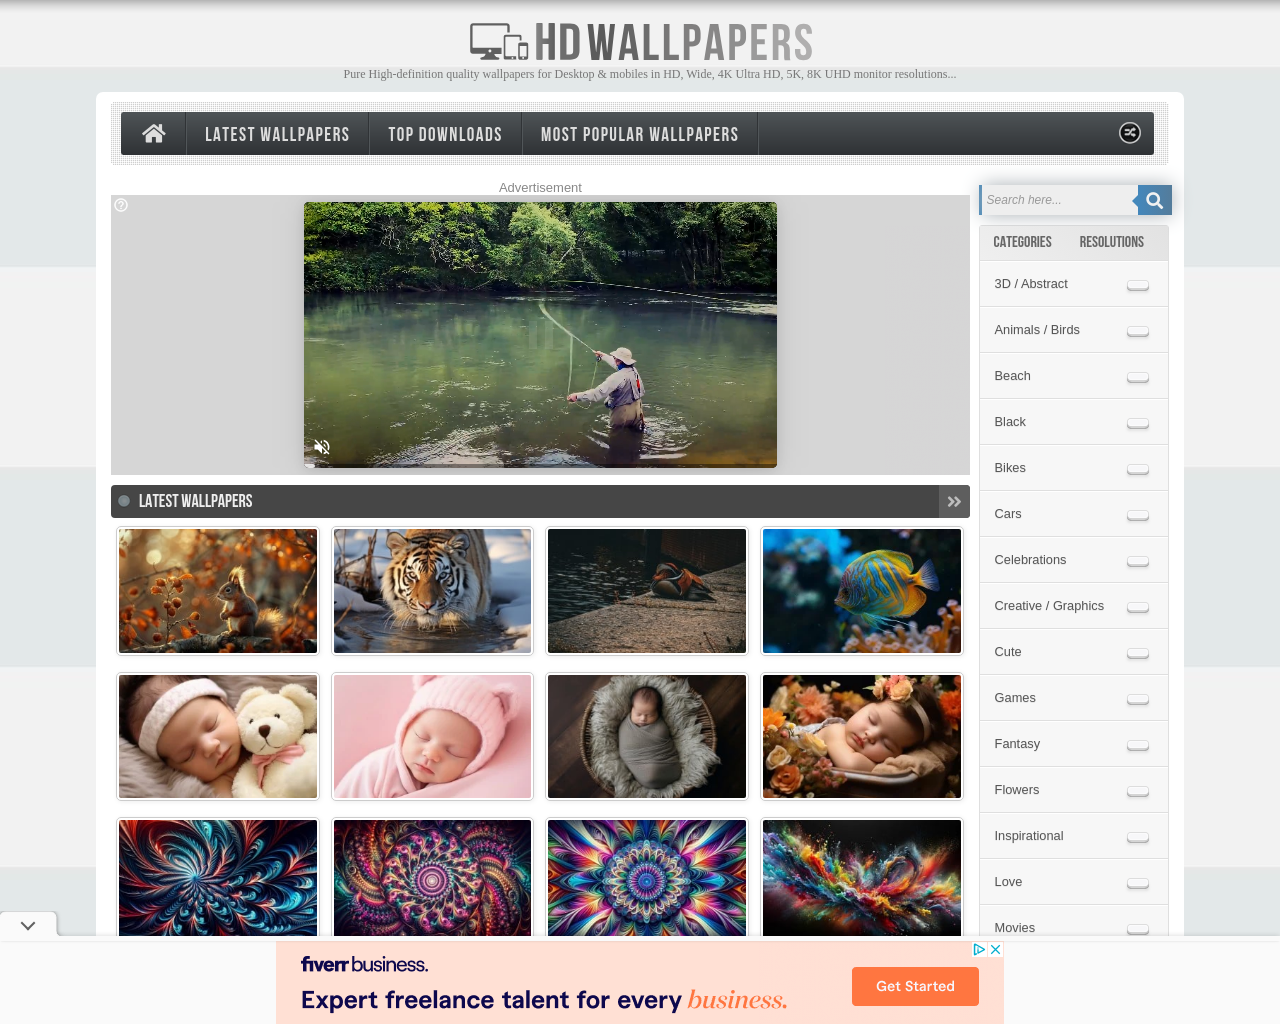 hdwallpapers.in